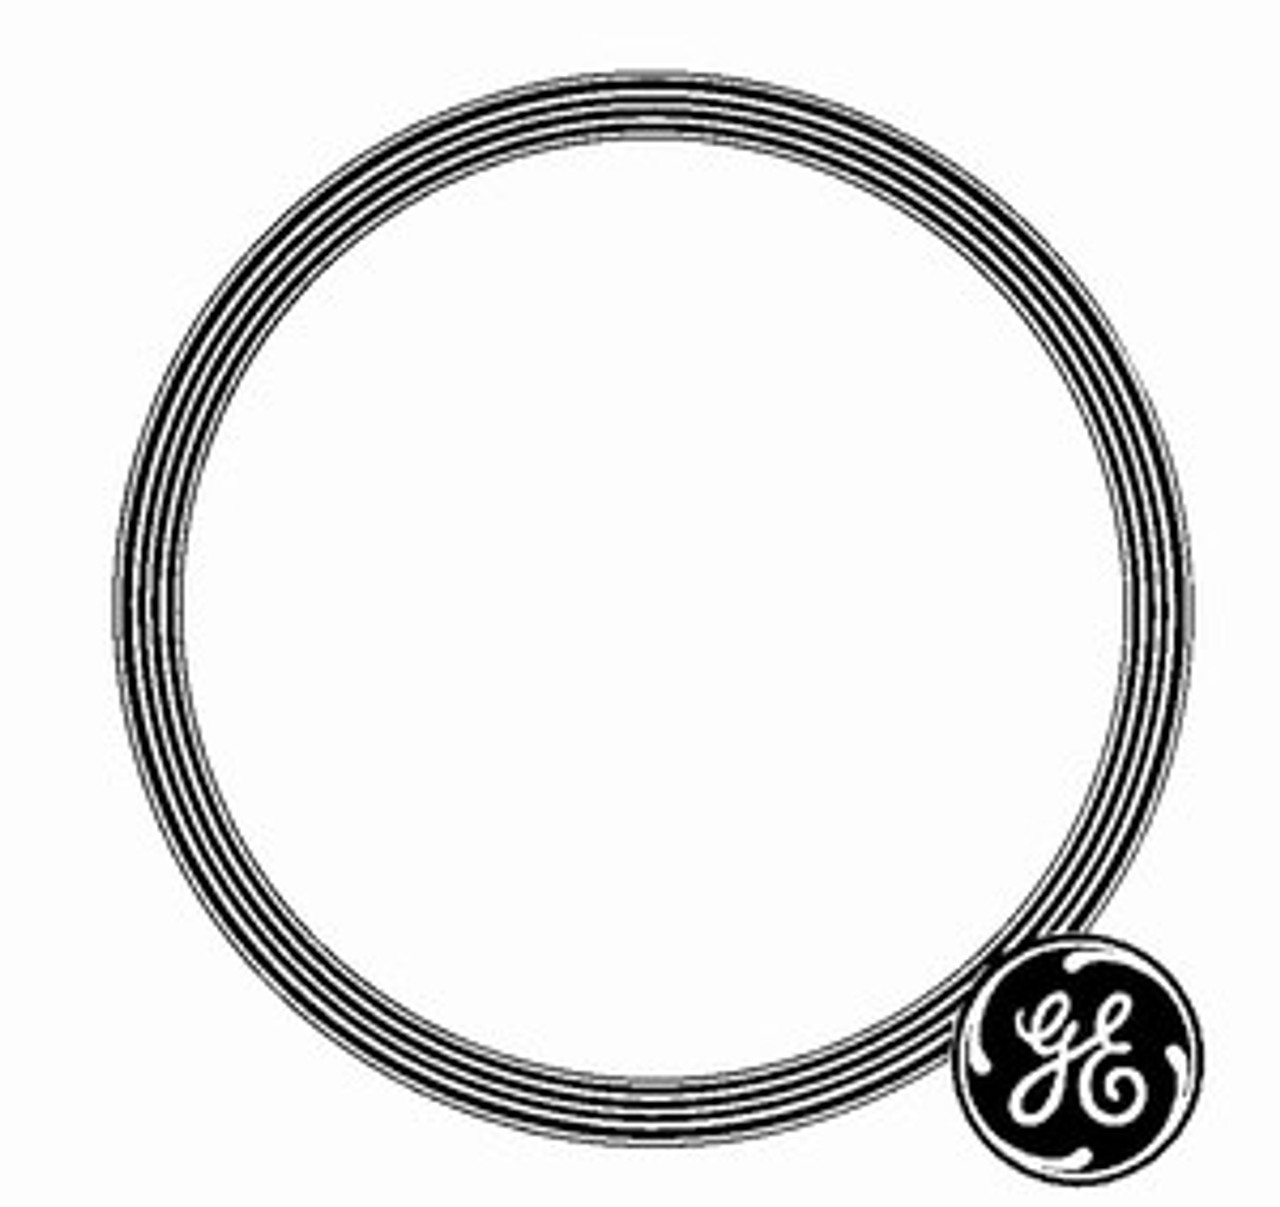 An image of a GE Appliances WH8X305 TUB GASKET